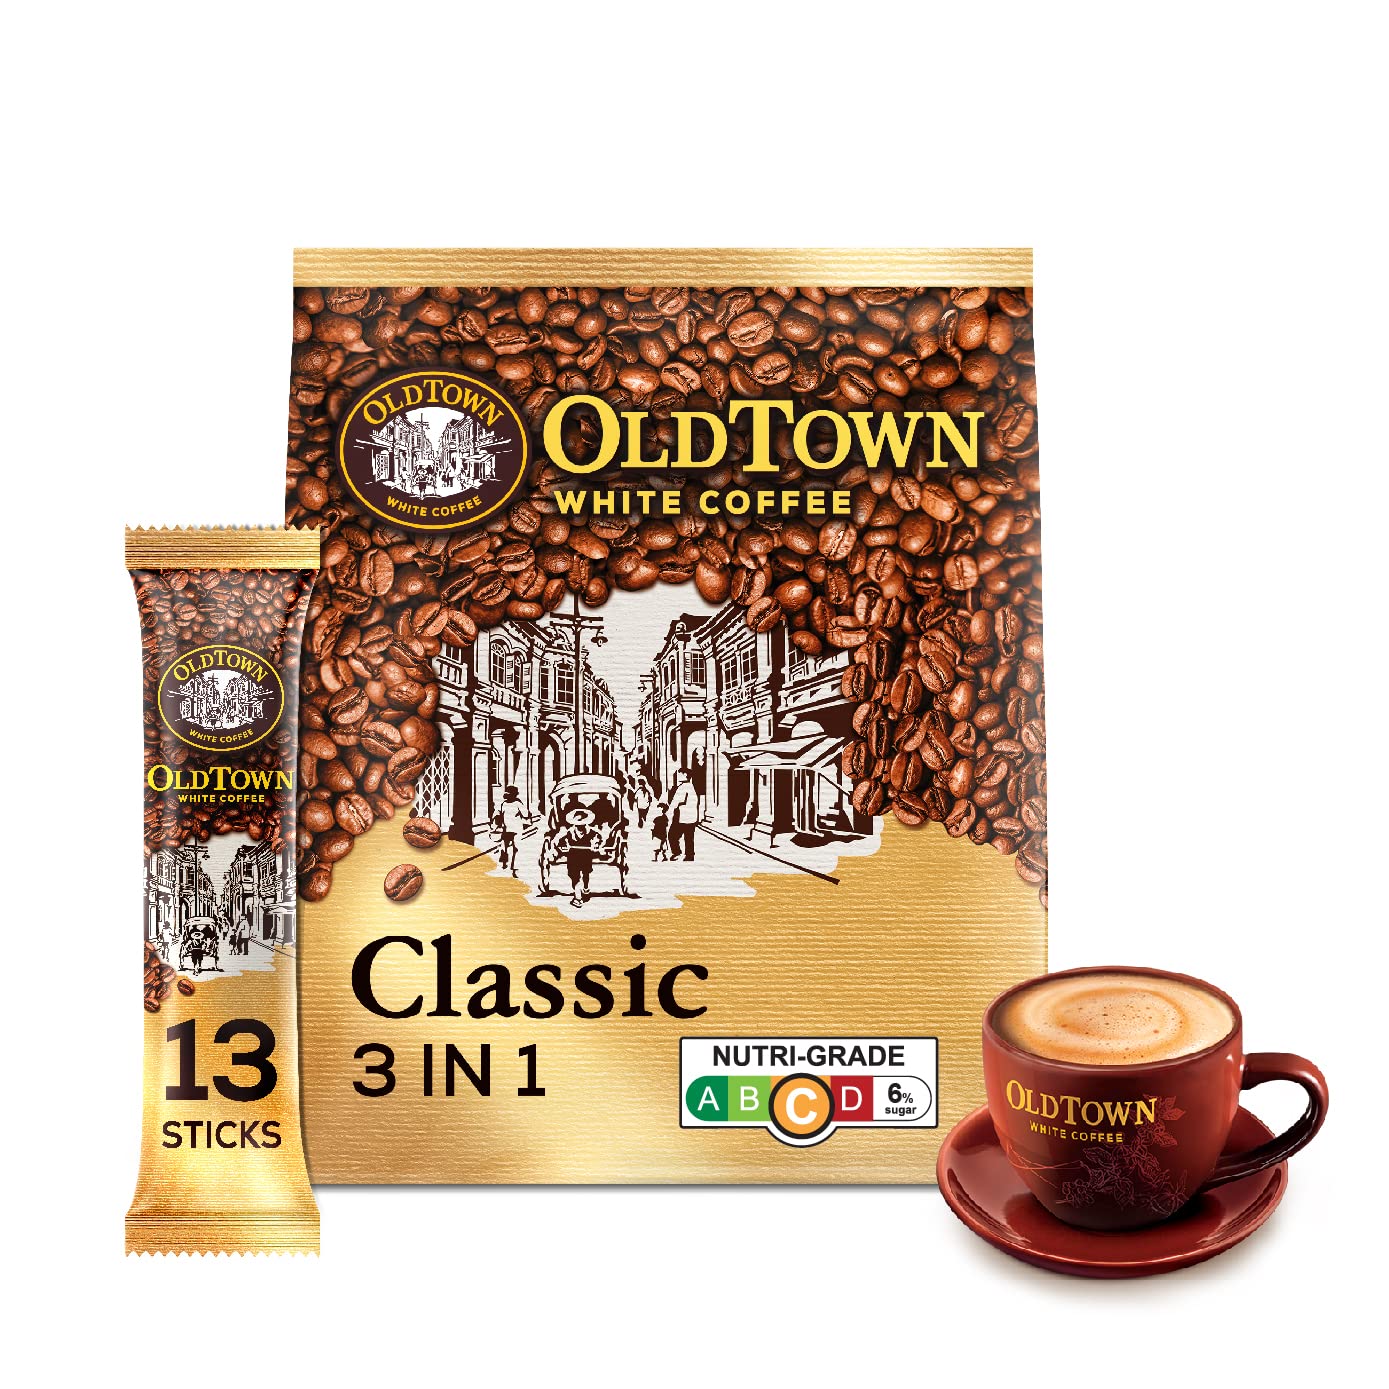 OldTown 3 in 1 White Coffee Classic'